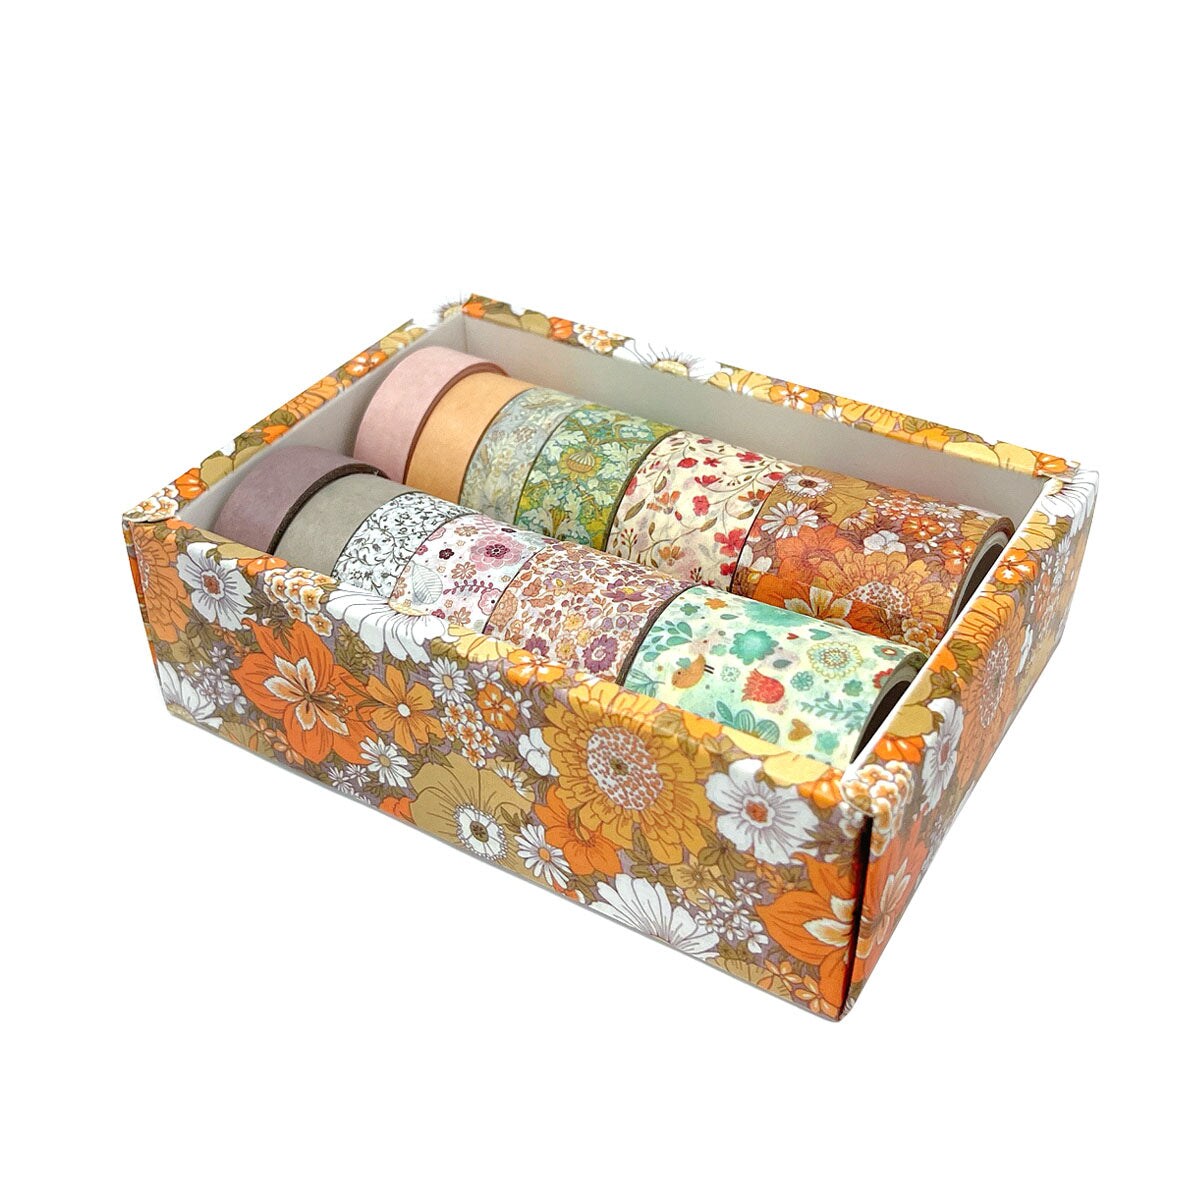 Wrapables Decorative Washi Tape Box Set for DIY Arts &#x26; Crafts, Scrapbooking, Diary, Stationery, Card-Making, Gift Wrapping (12 Rolls)